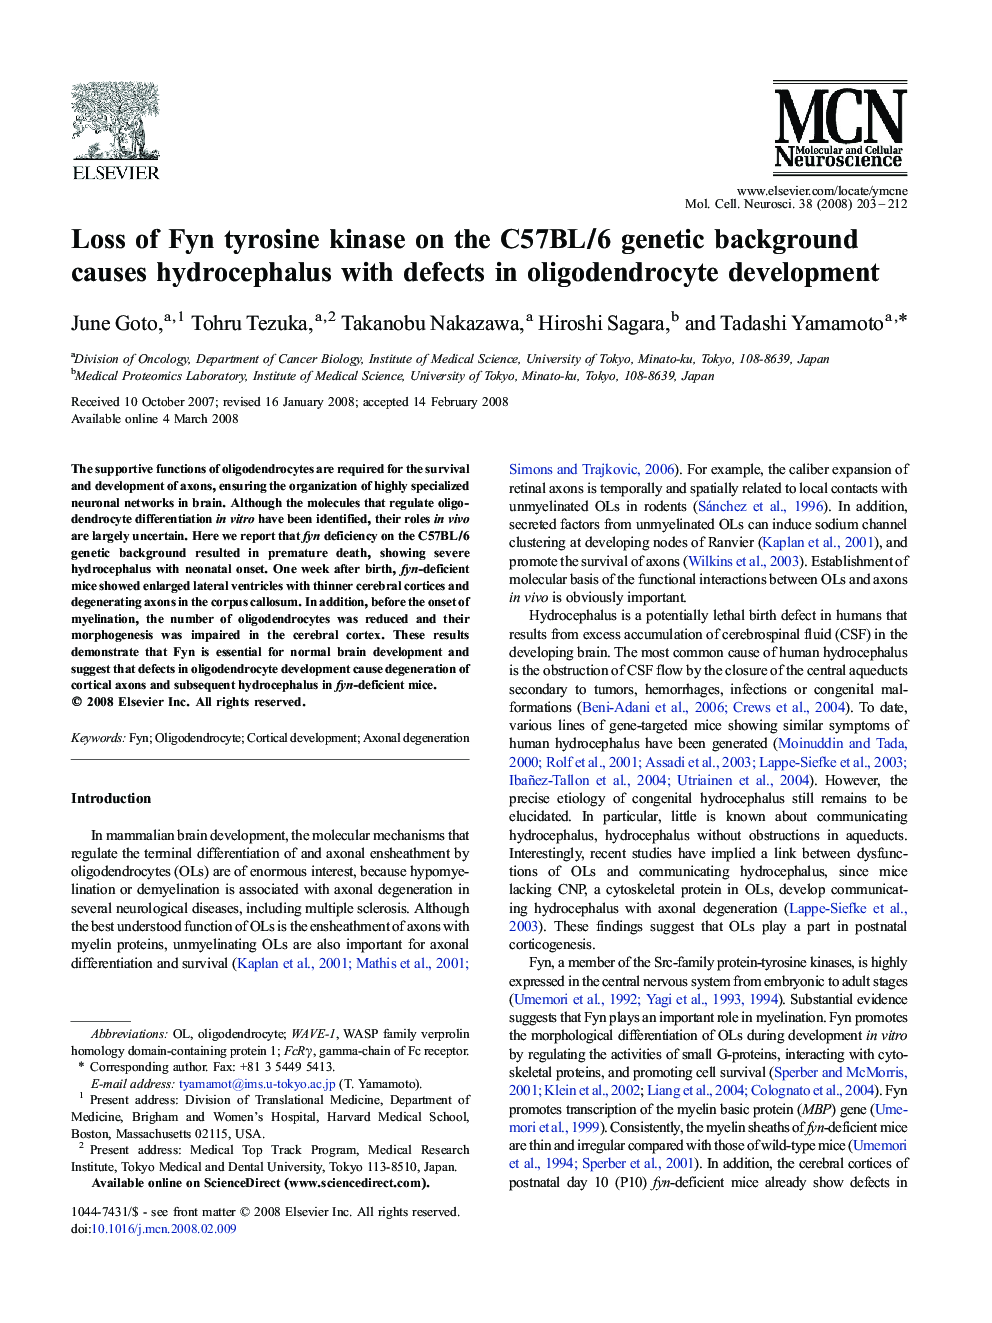 Loss of Fyn tyrosine kinase on the C57BL/6 genetic background causes hydrocephalus with defects in oligodendrocyte development